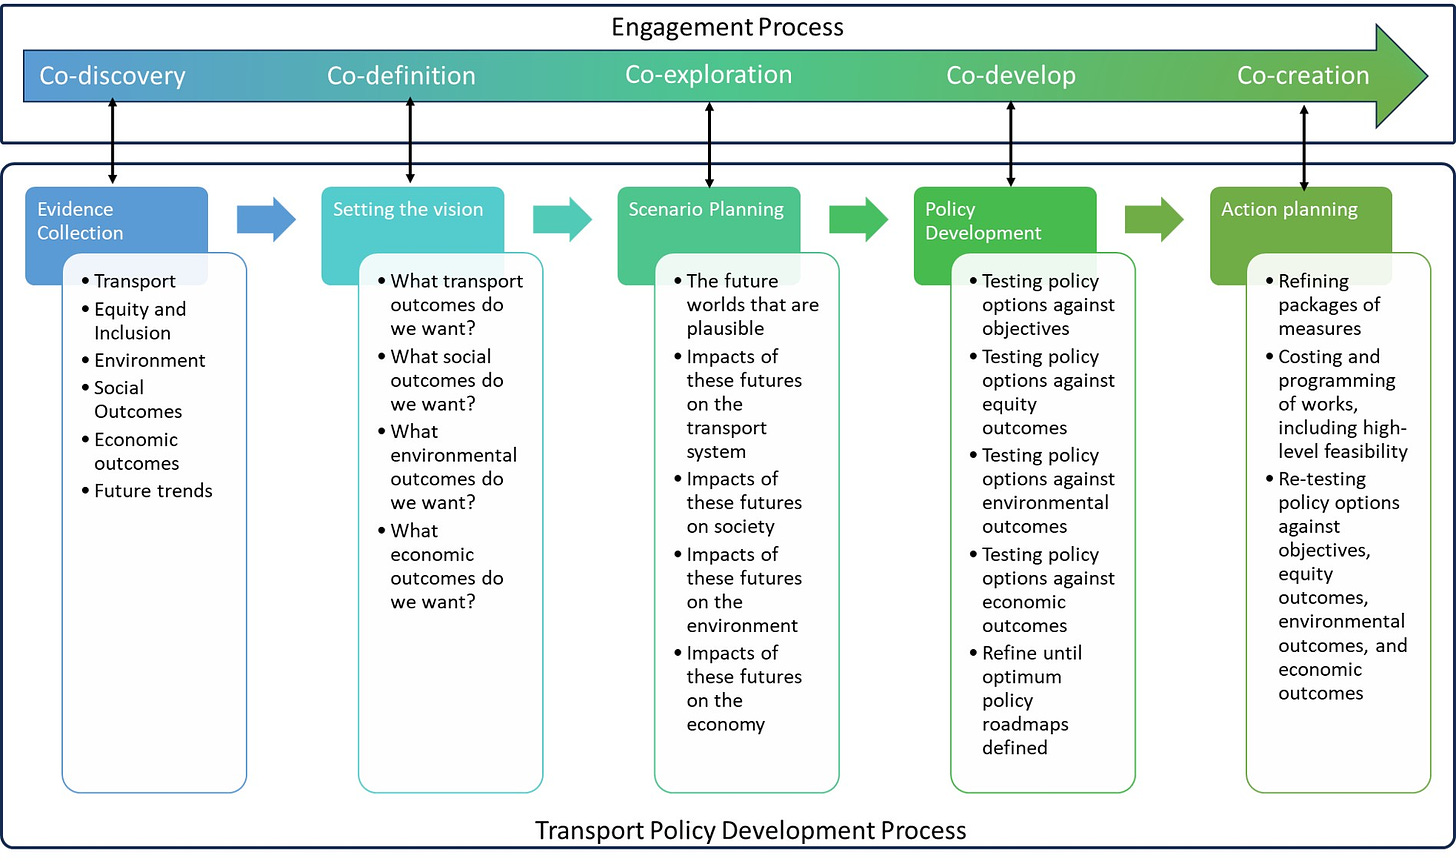 EIA and transport policy development process as one